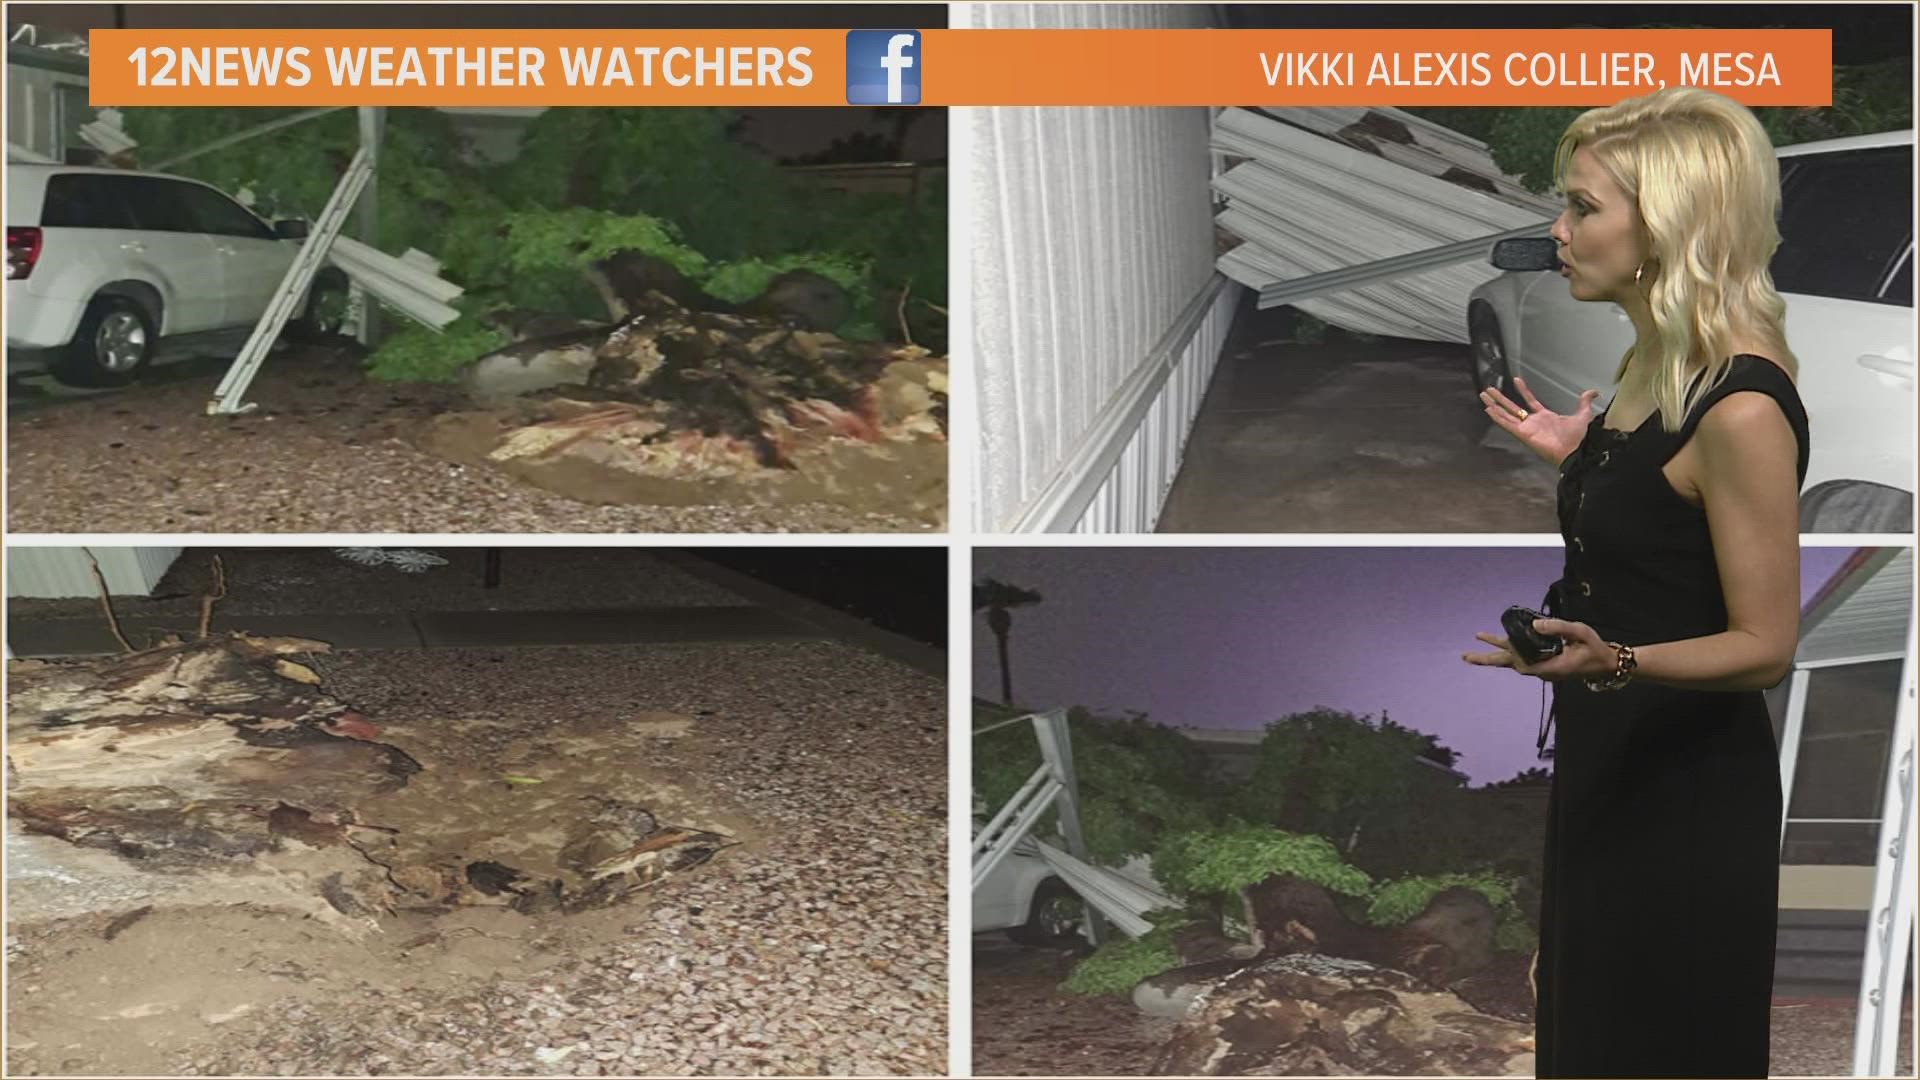 The strength of the storms caused damage in the east Valley where heavy rainfall was recorded.